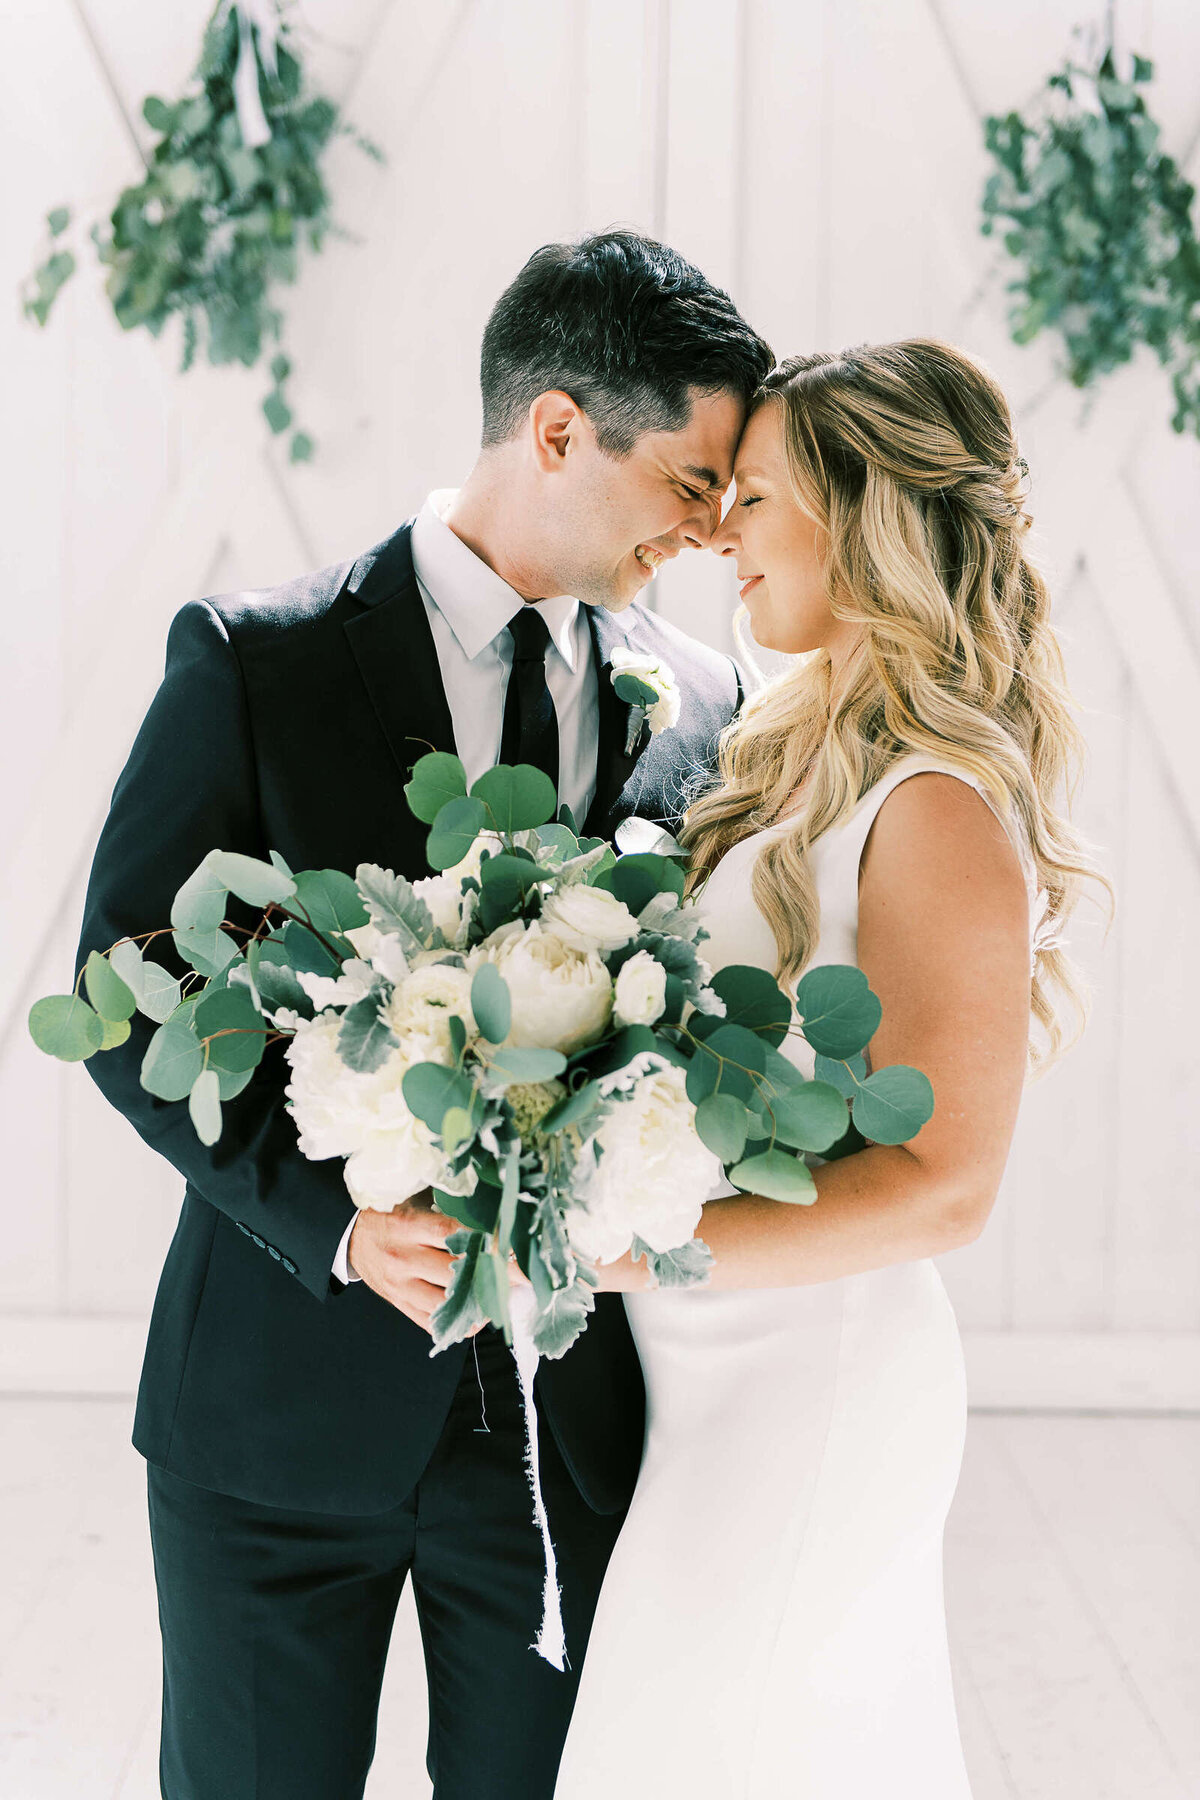 Newly married couple embraces while holding large greenery and floral bouquet at wedding